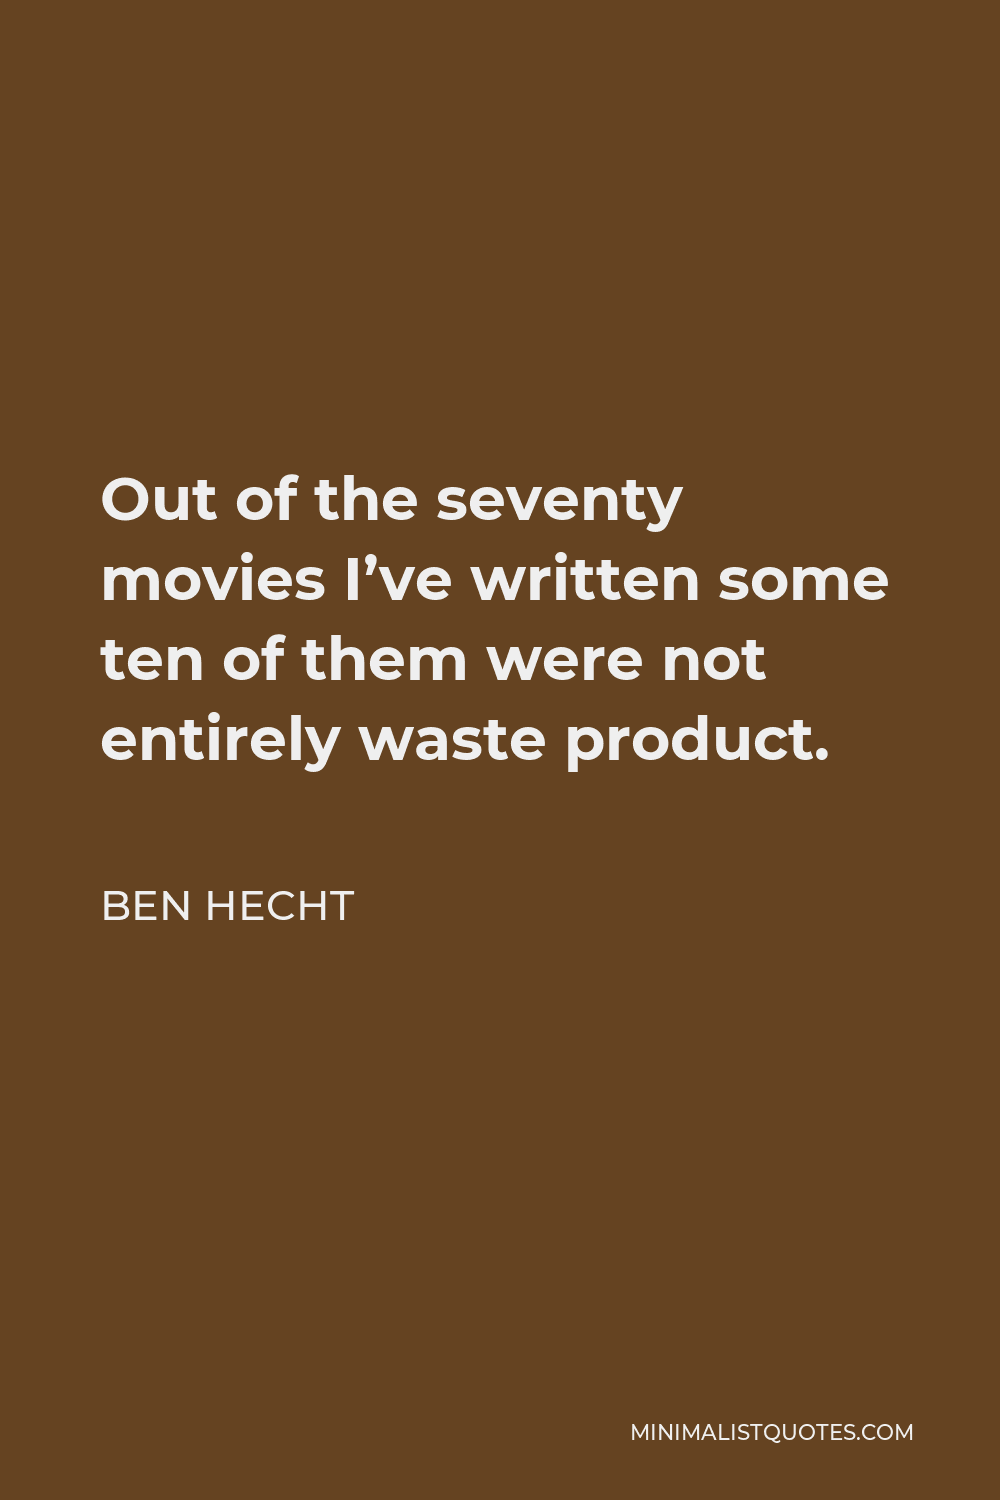 Ben Hecht Quote - Out of the seventy movies I’ve written some ten of them were not entirely waste product.